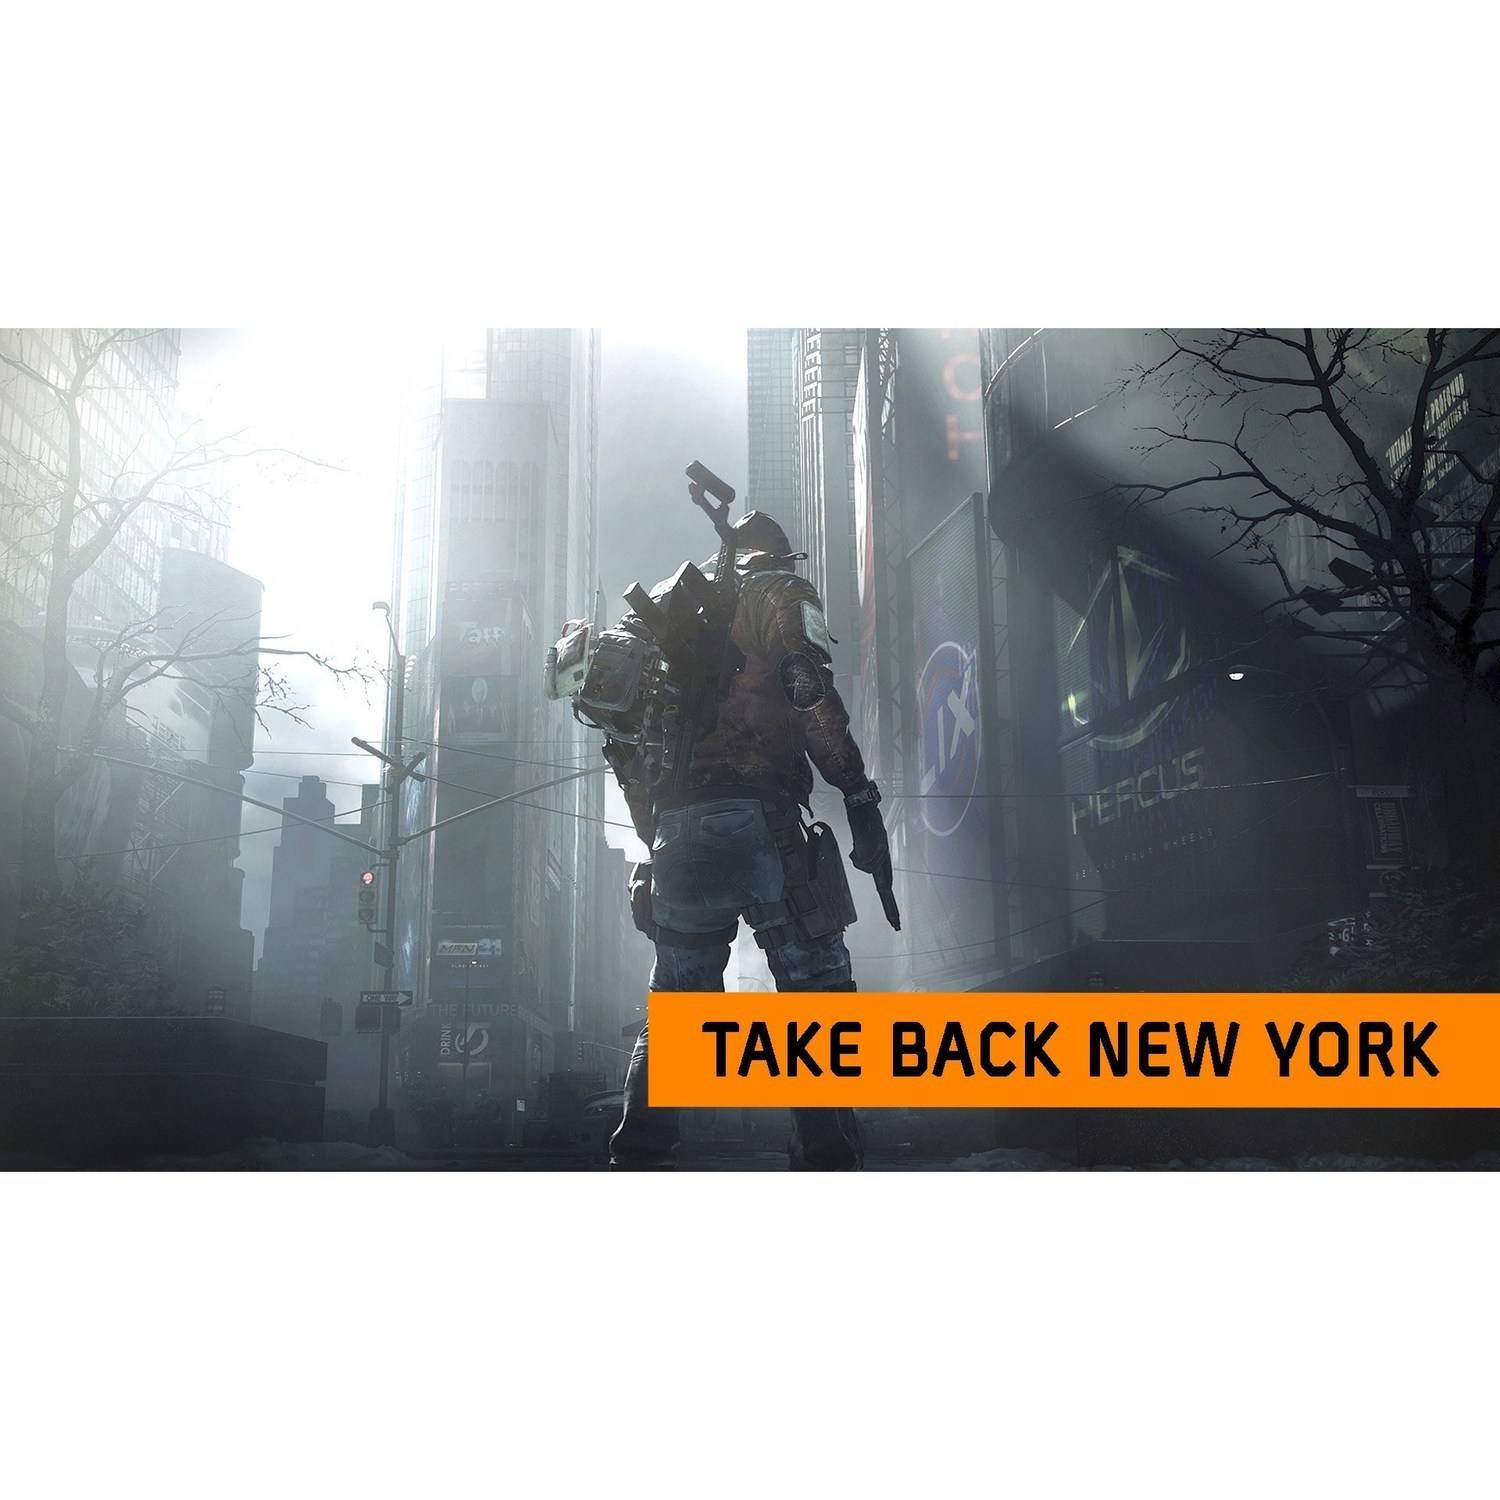 Tom Clancy's: The Division, Ubisoft, Xbox One, 887256014513 - image 4 of 7